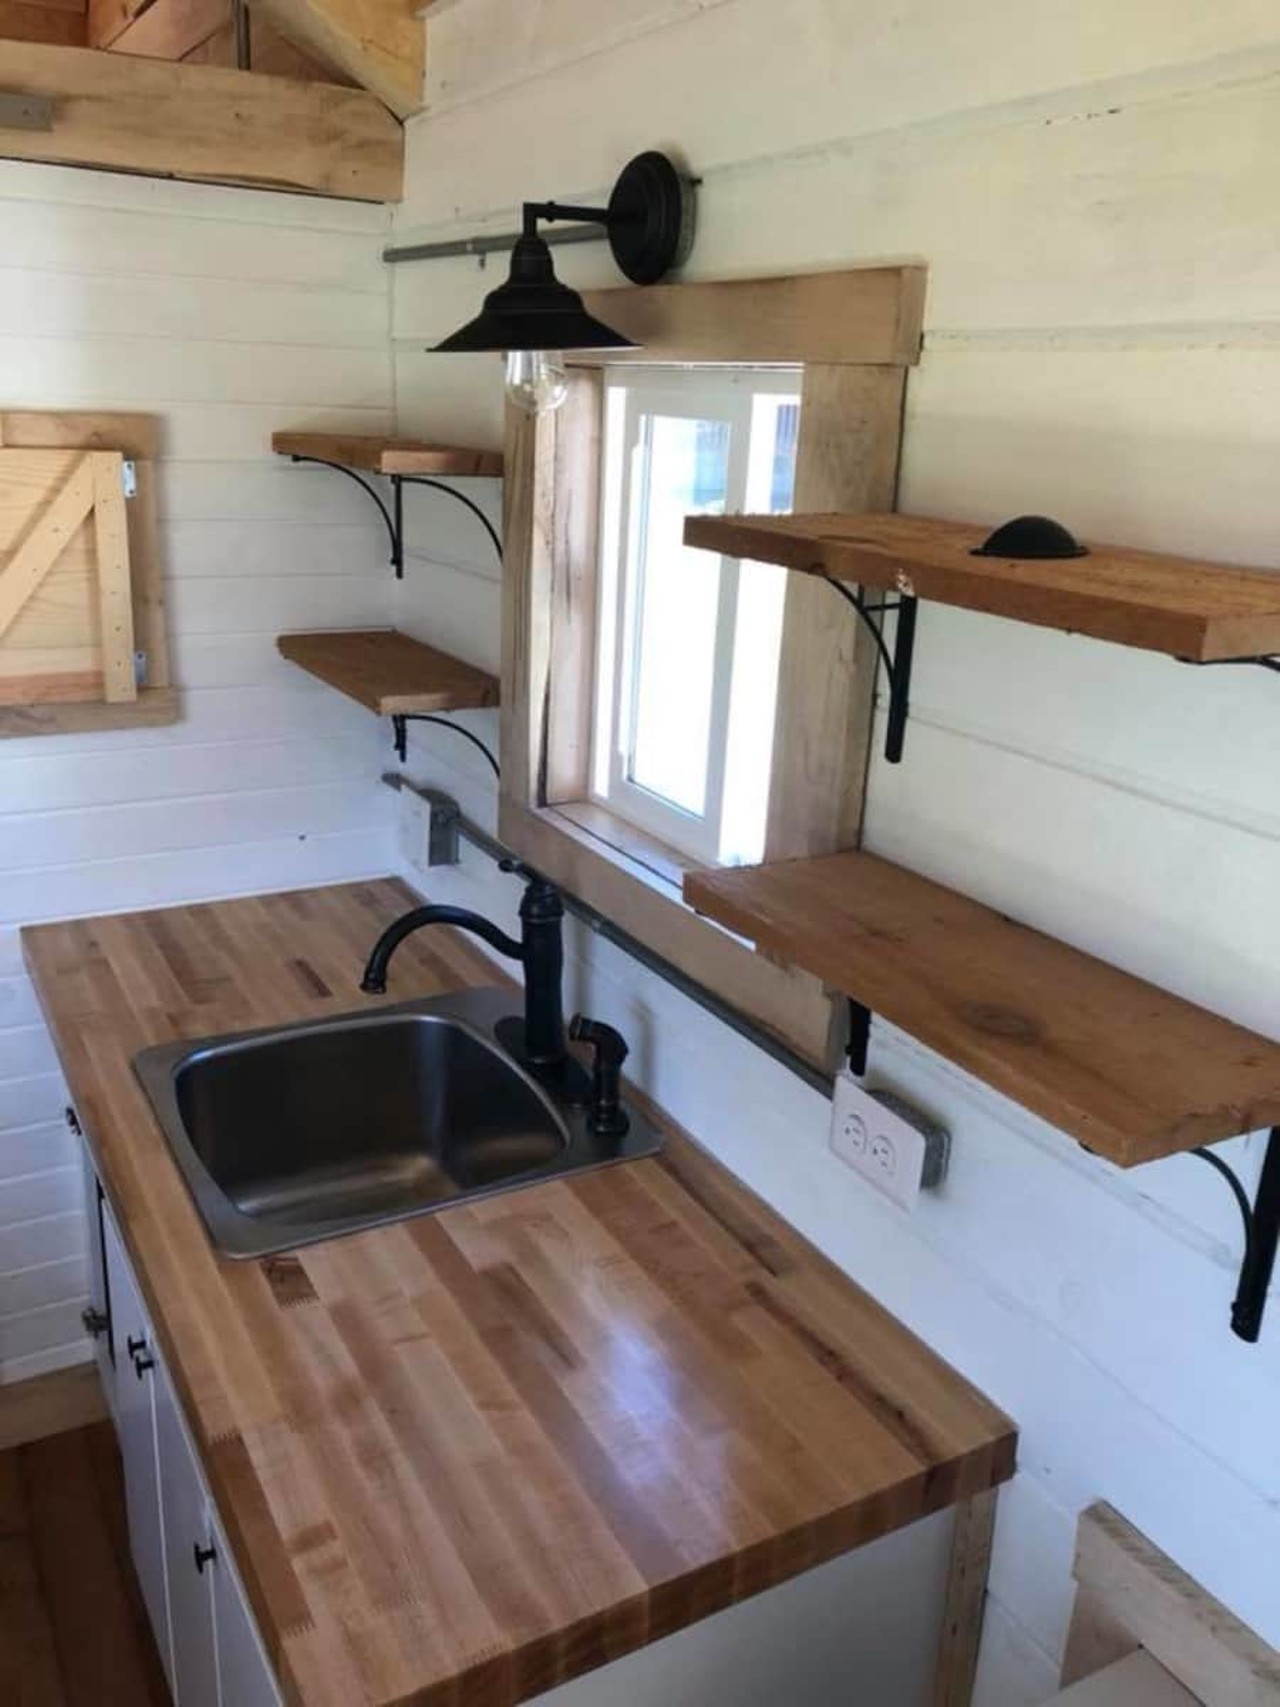 8 Charming Tiny Houses For Sale in Northeast Ohio Right Now | Cleveland ...